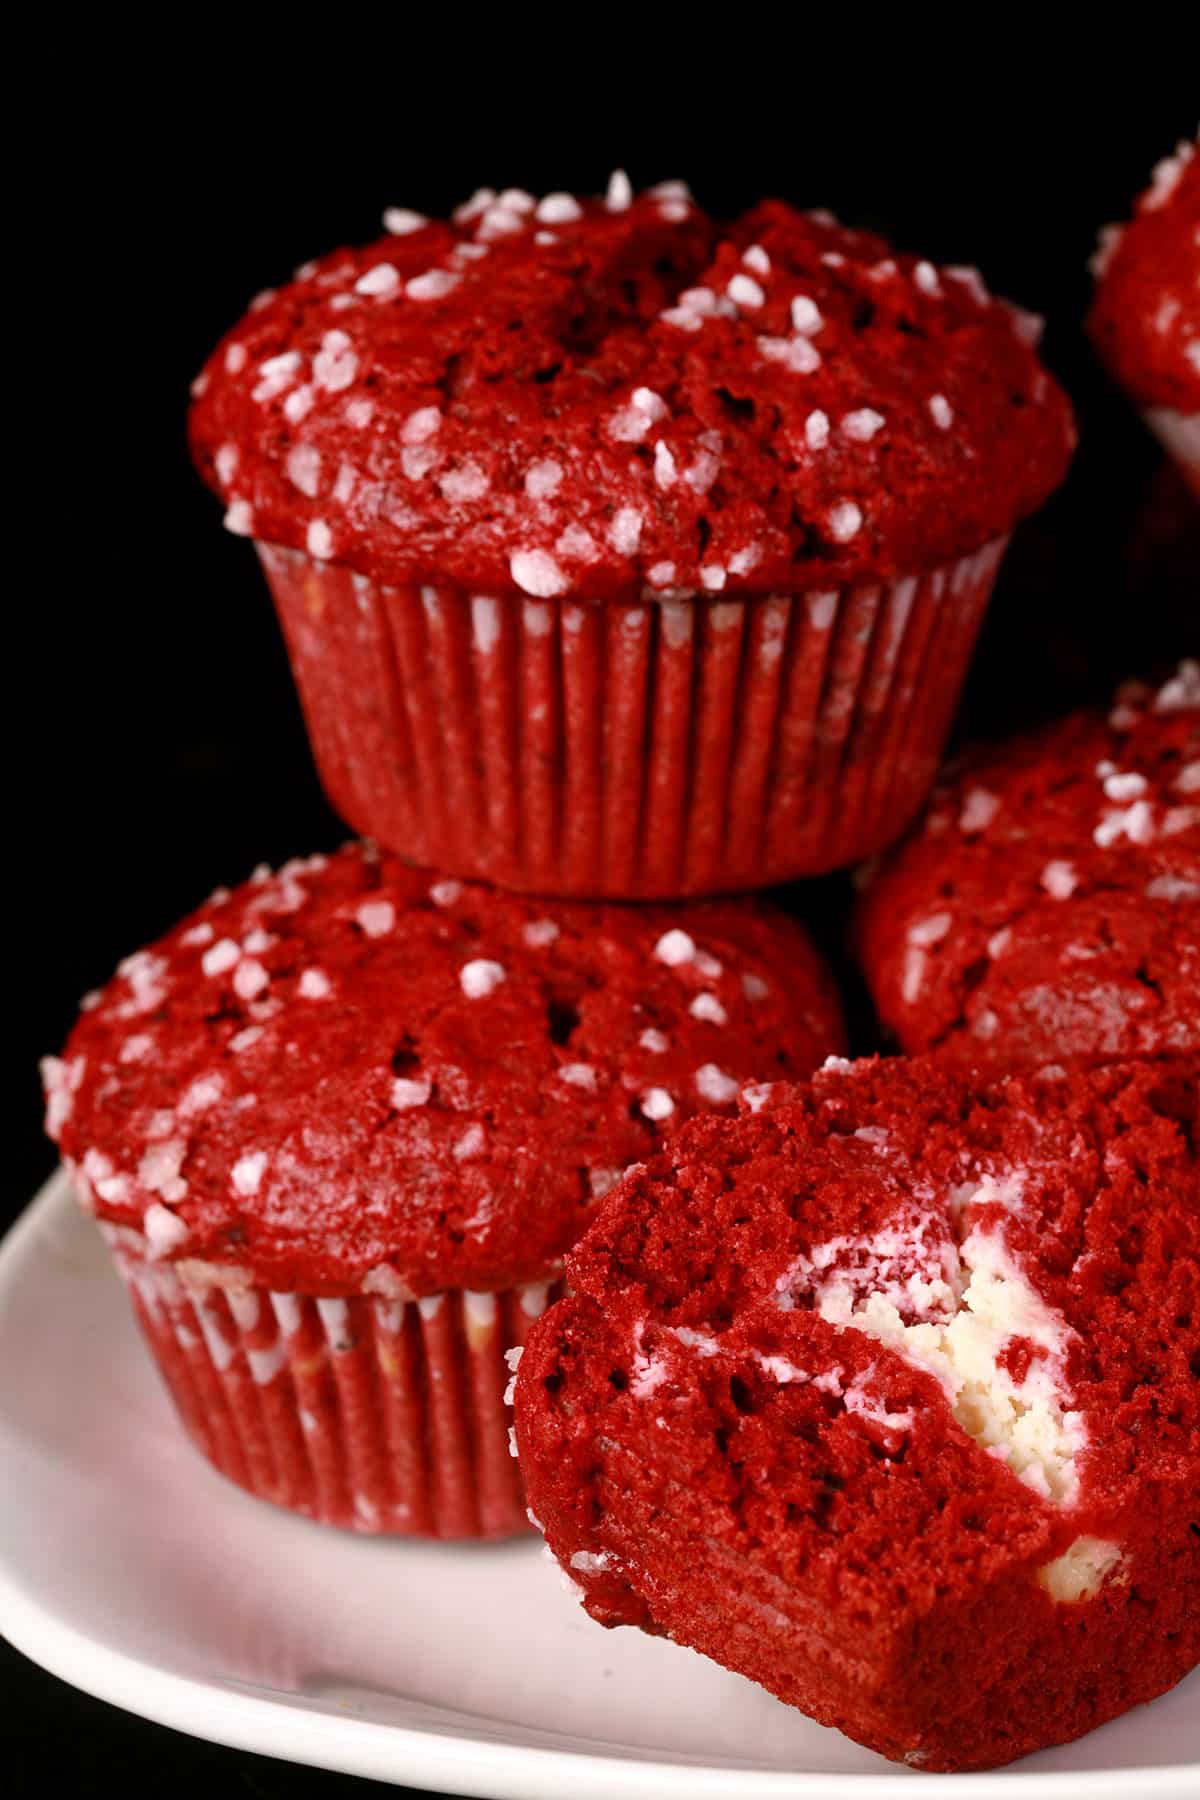 A cut open red velvet muffin with cream cheese filling, with more red velvet muffins behind it.